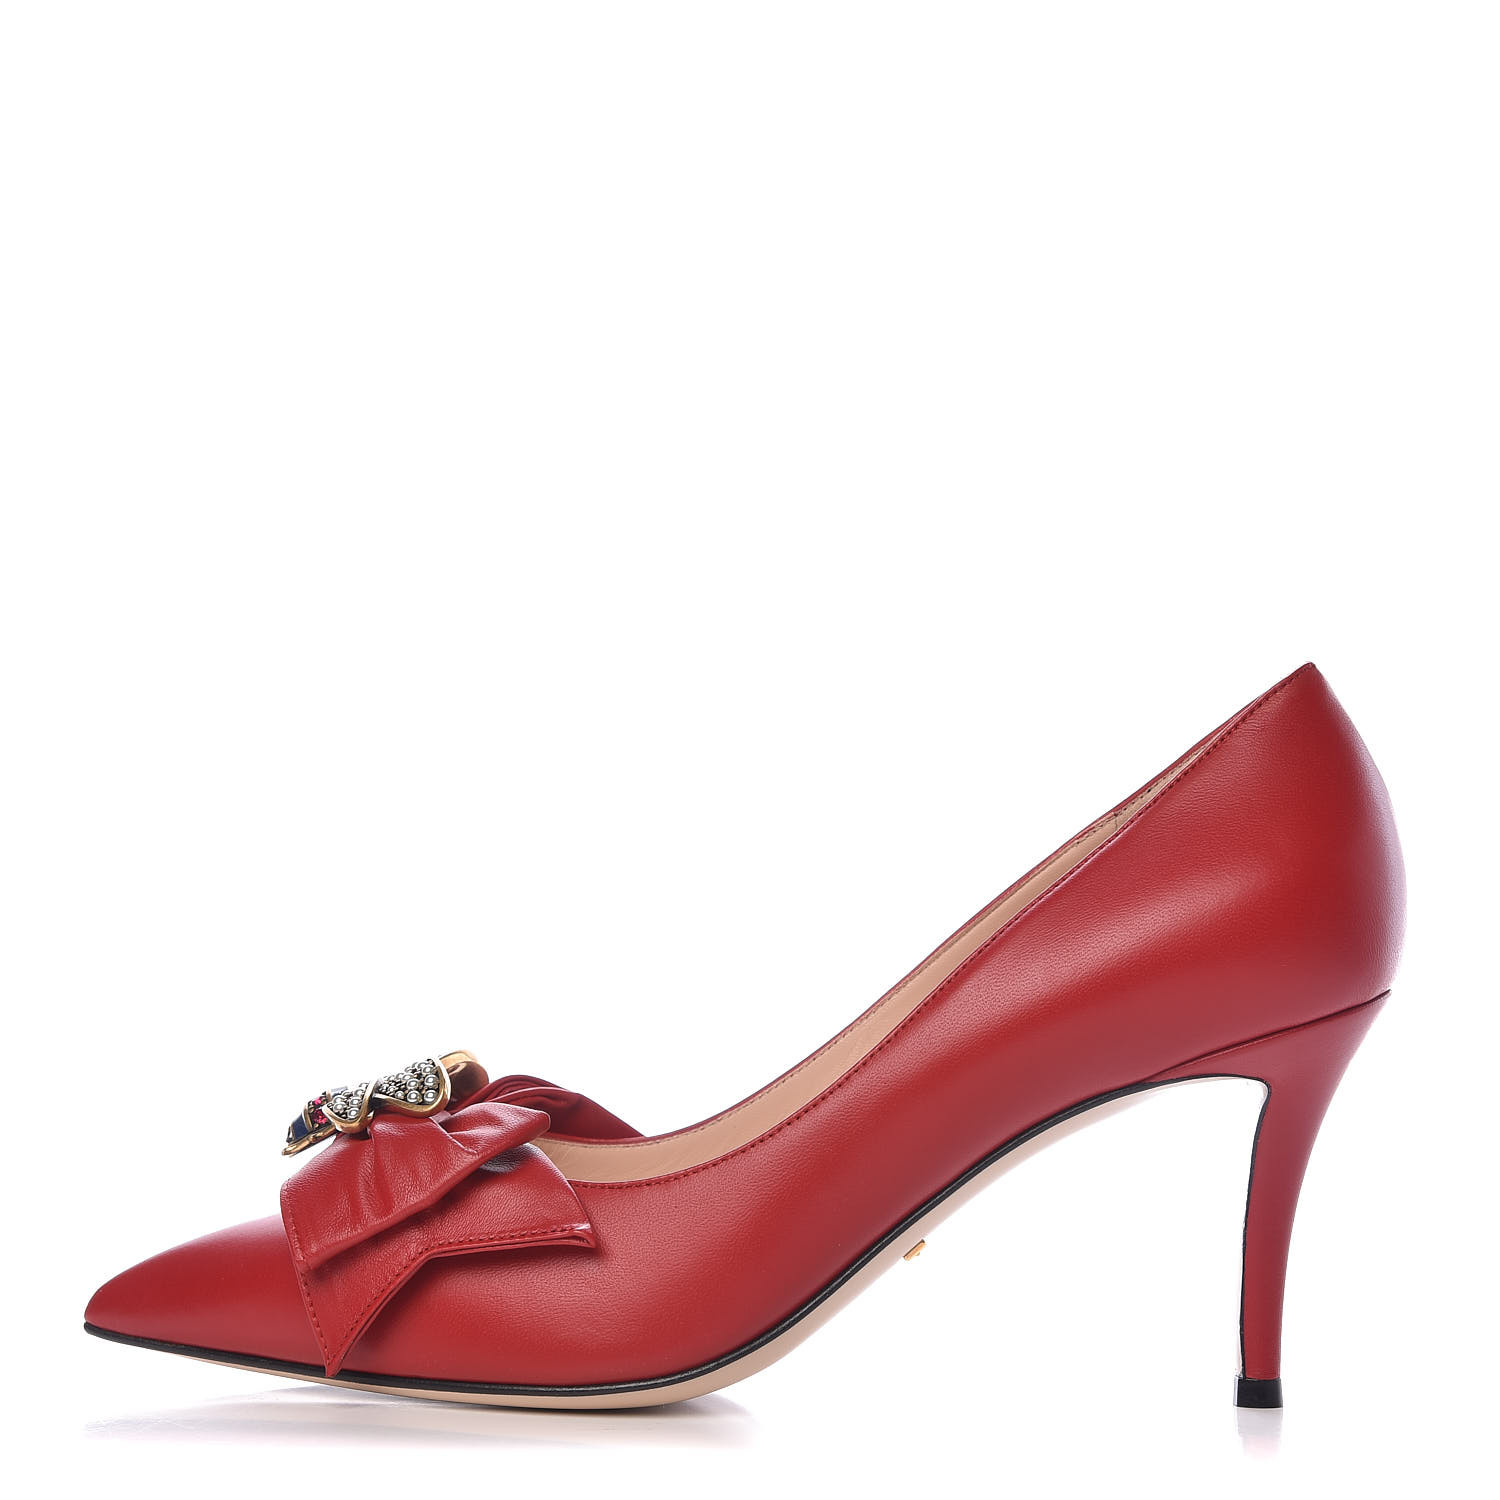 GUCCI Margaret Bow Mid Heel Pumps 40 Hibiscus Red 459540 | FASHIONPHILE